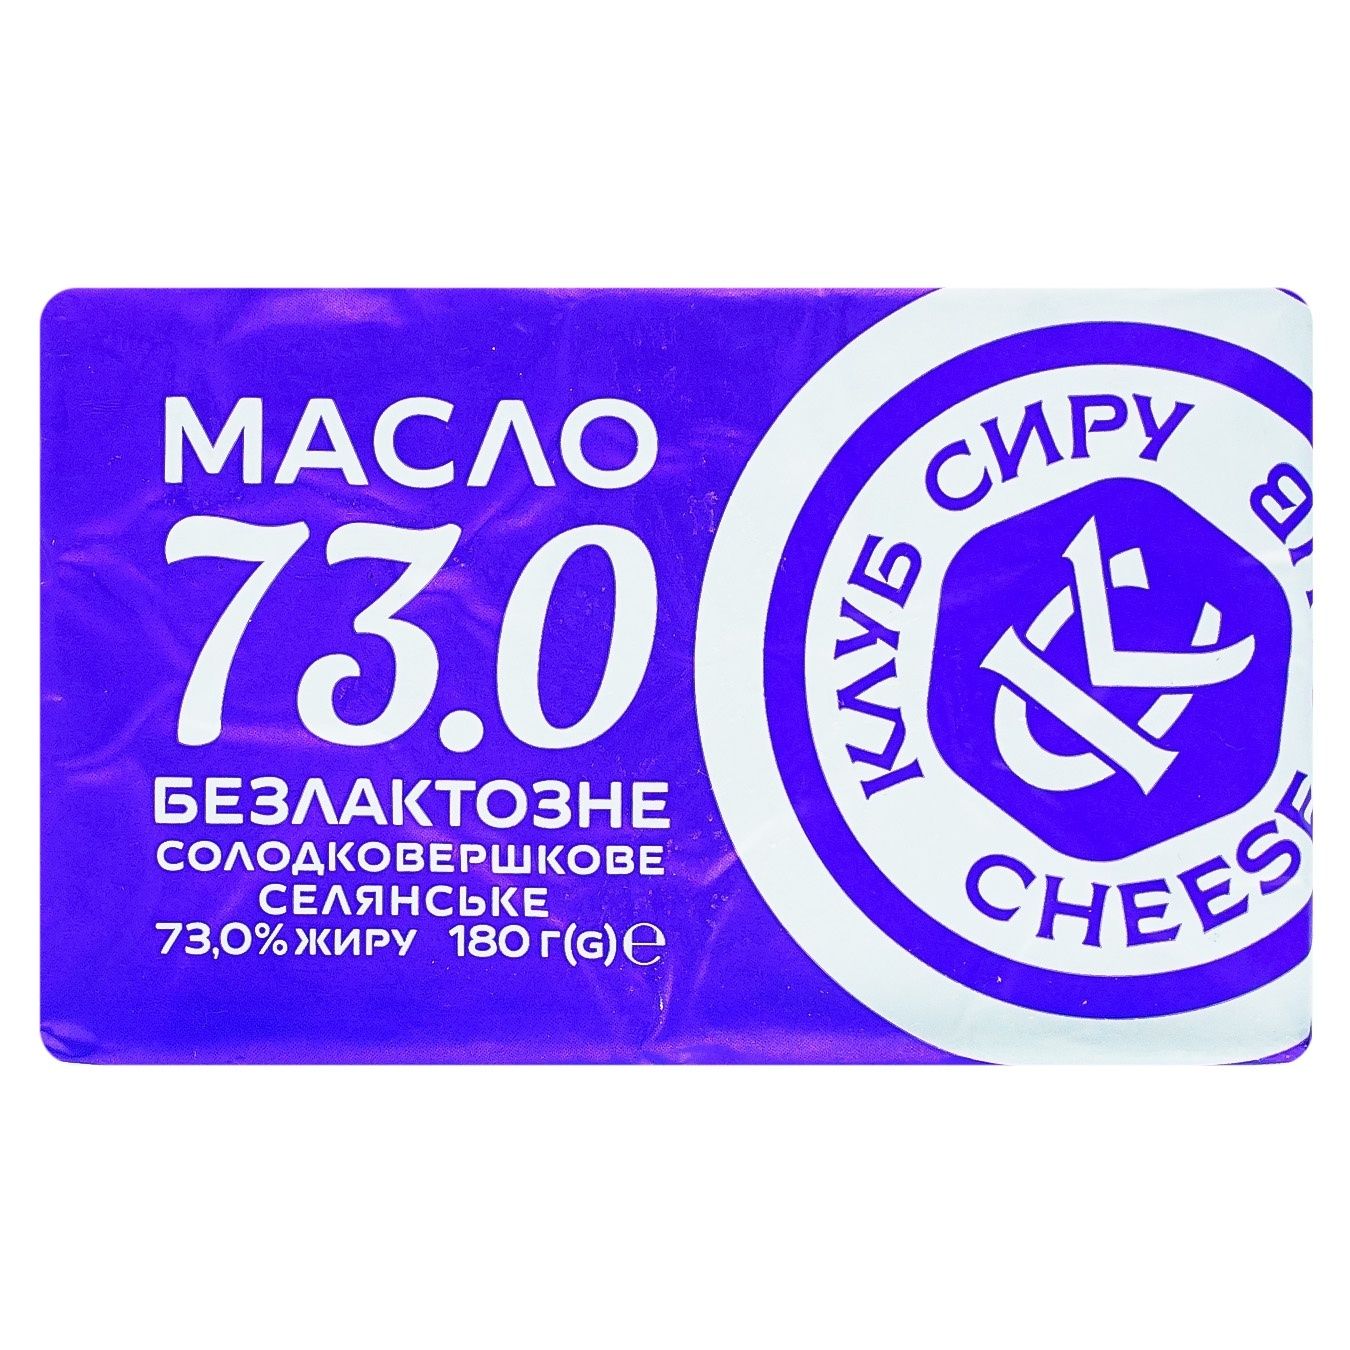 Club Syru Butter lactose-free sweet cream peasant 73% 180g